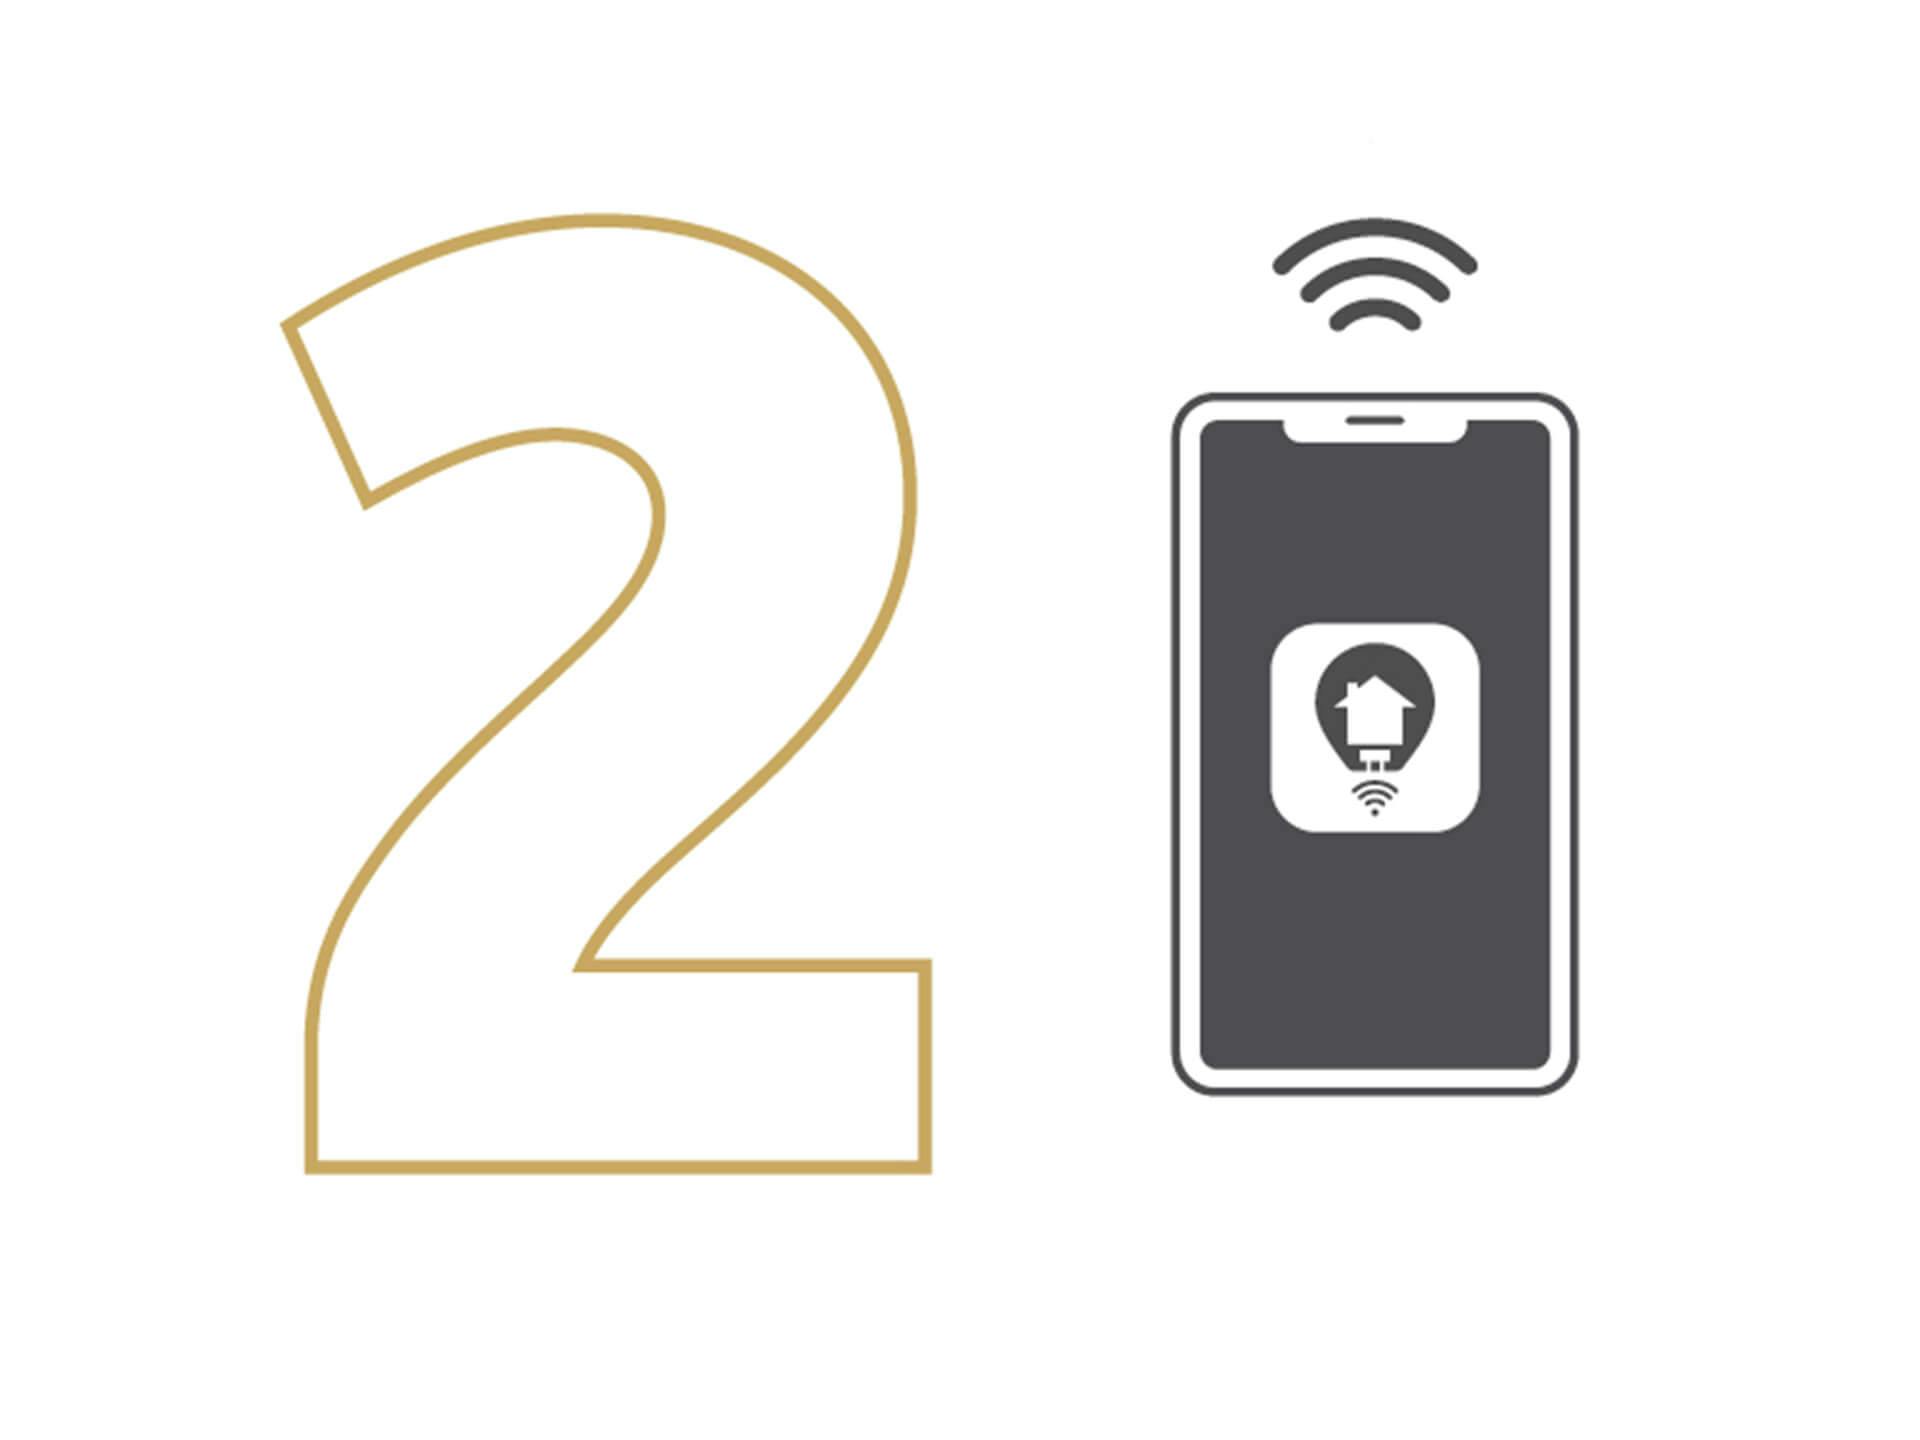 '2' next to an illustration of a mobile phone with the Kichler Connect app logo on it